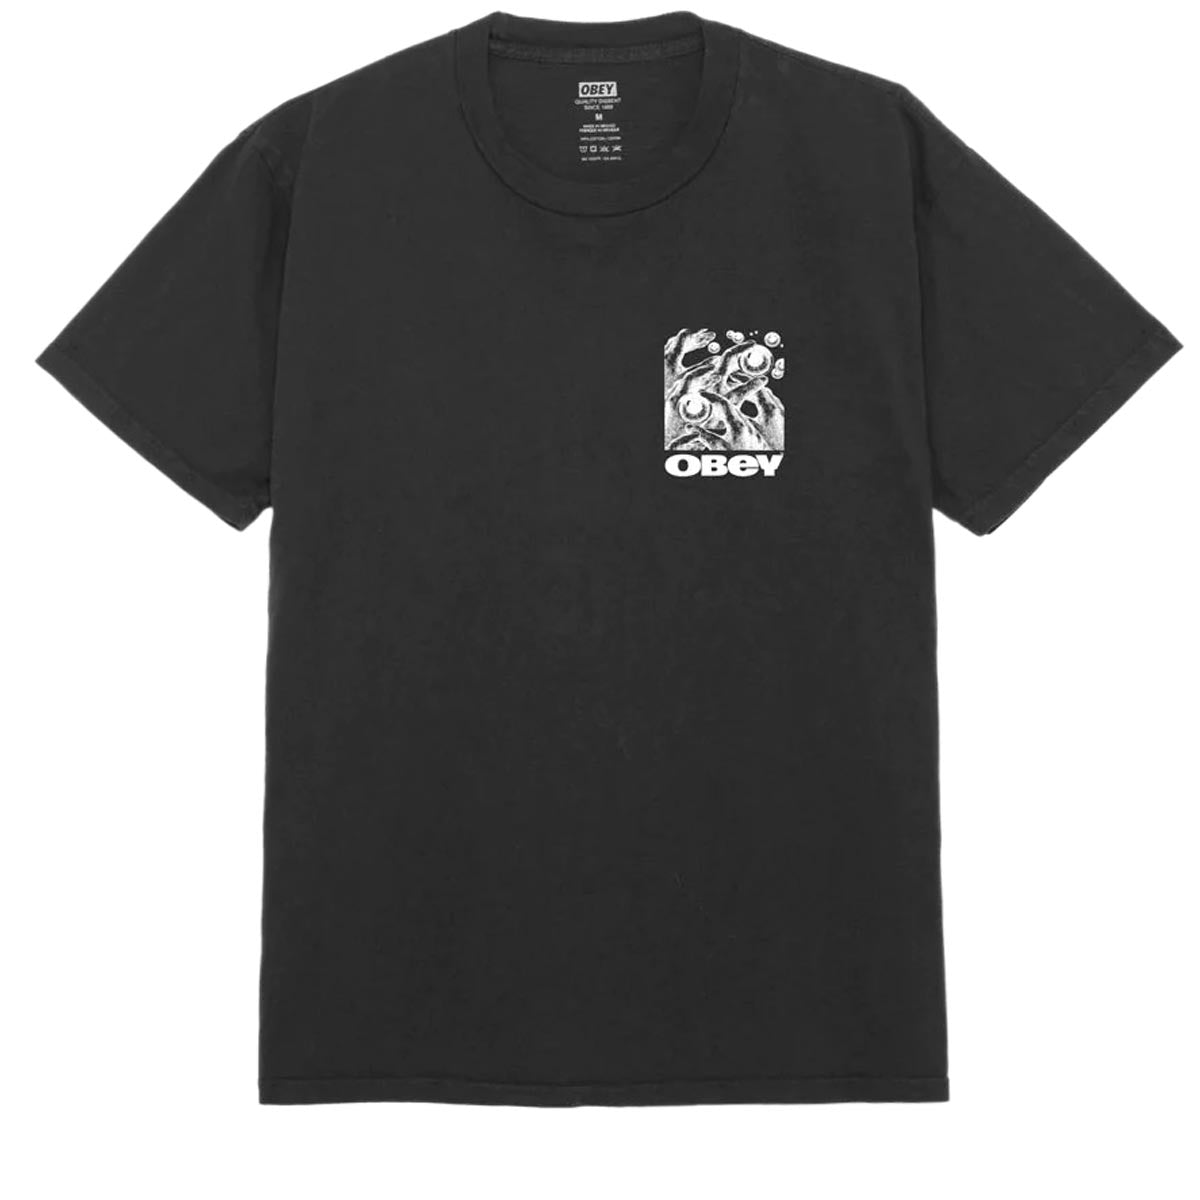 Obey Eyes In My Head T-Shirt - Pigment Vintage Black image 2